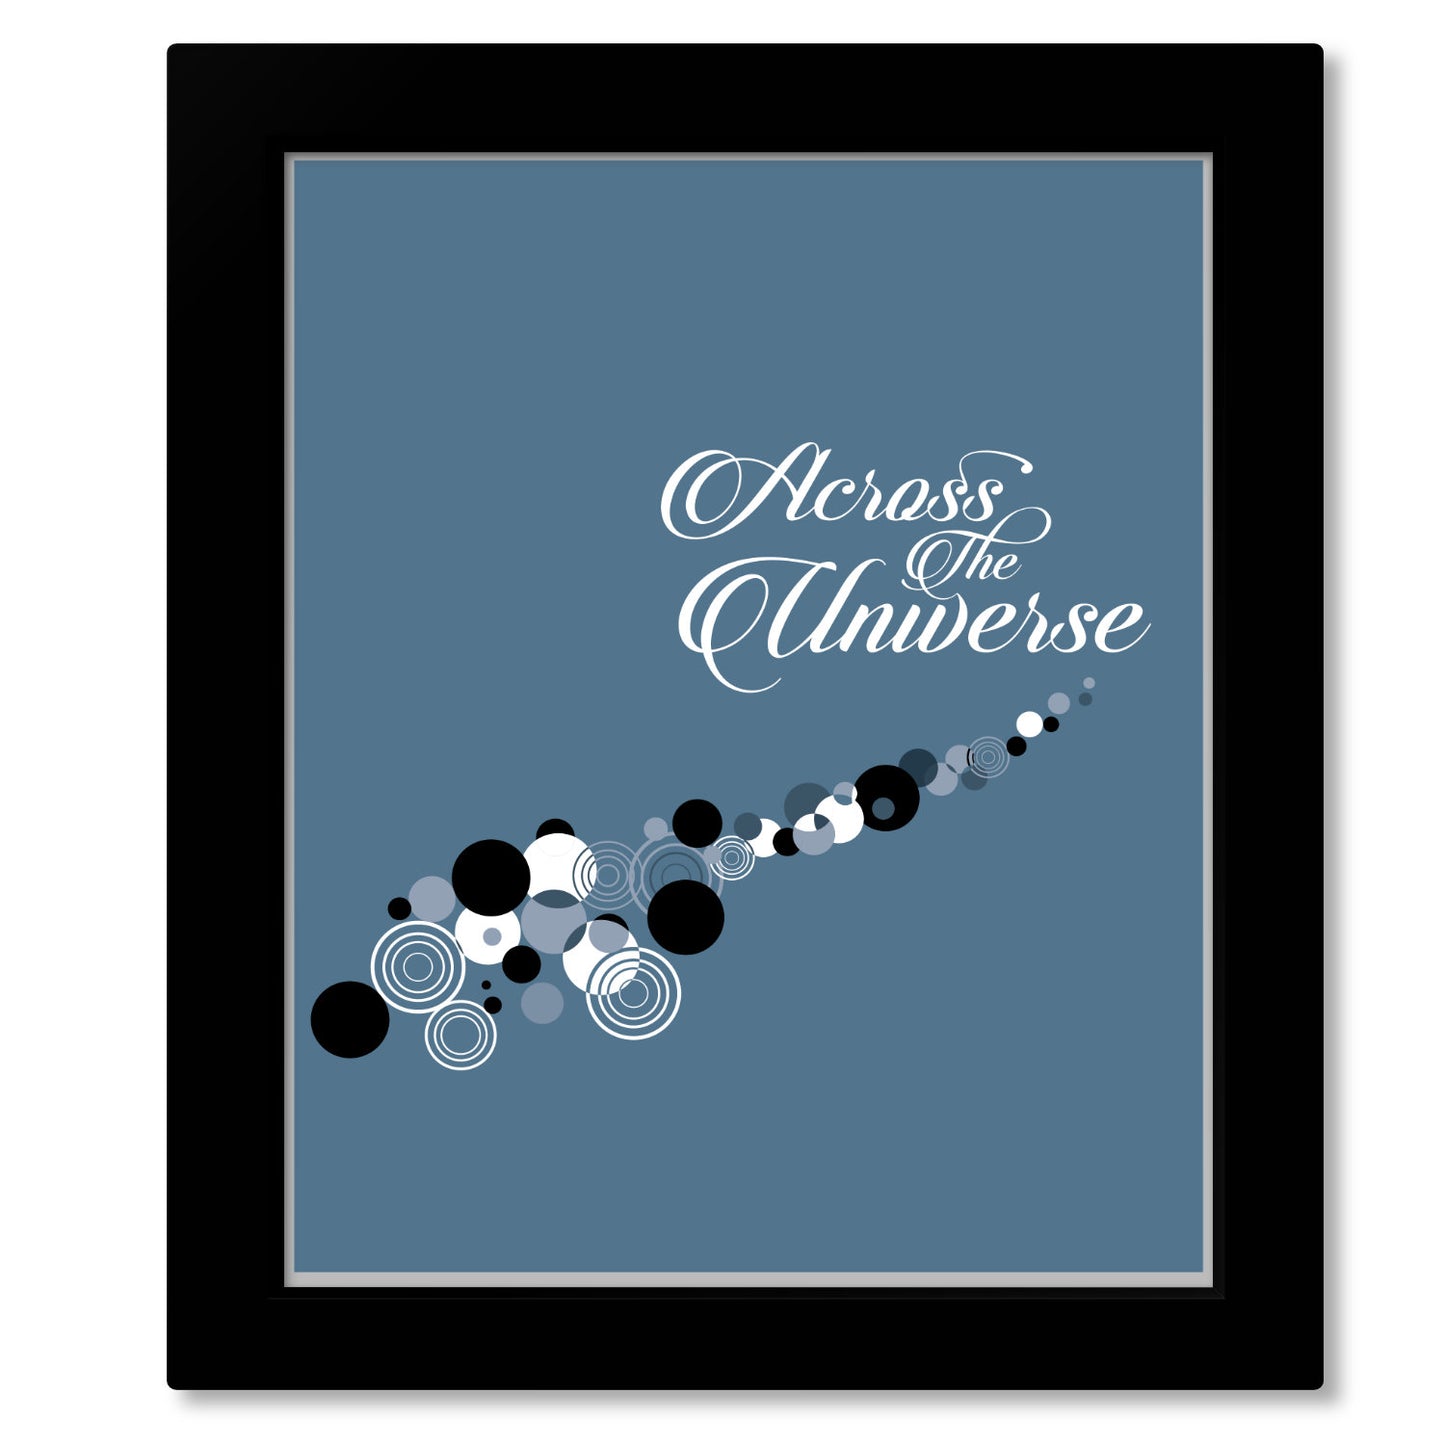 Across the Universe by the Beatles - Song Lyric Art Print